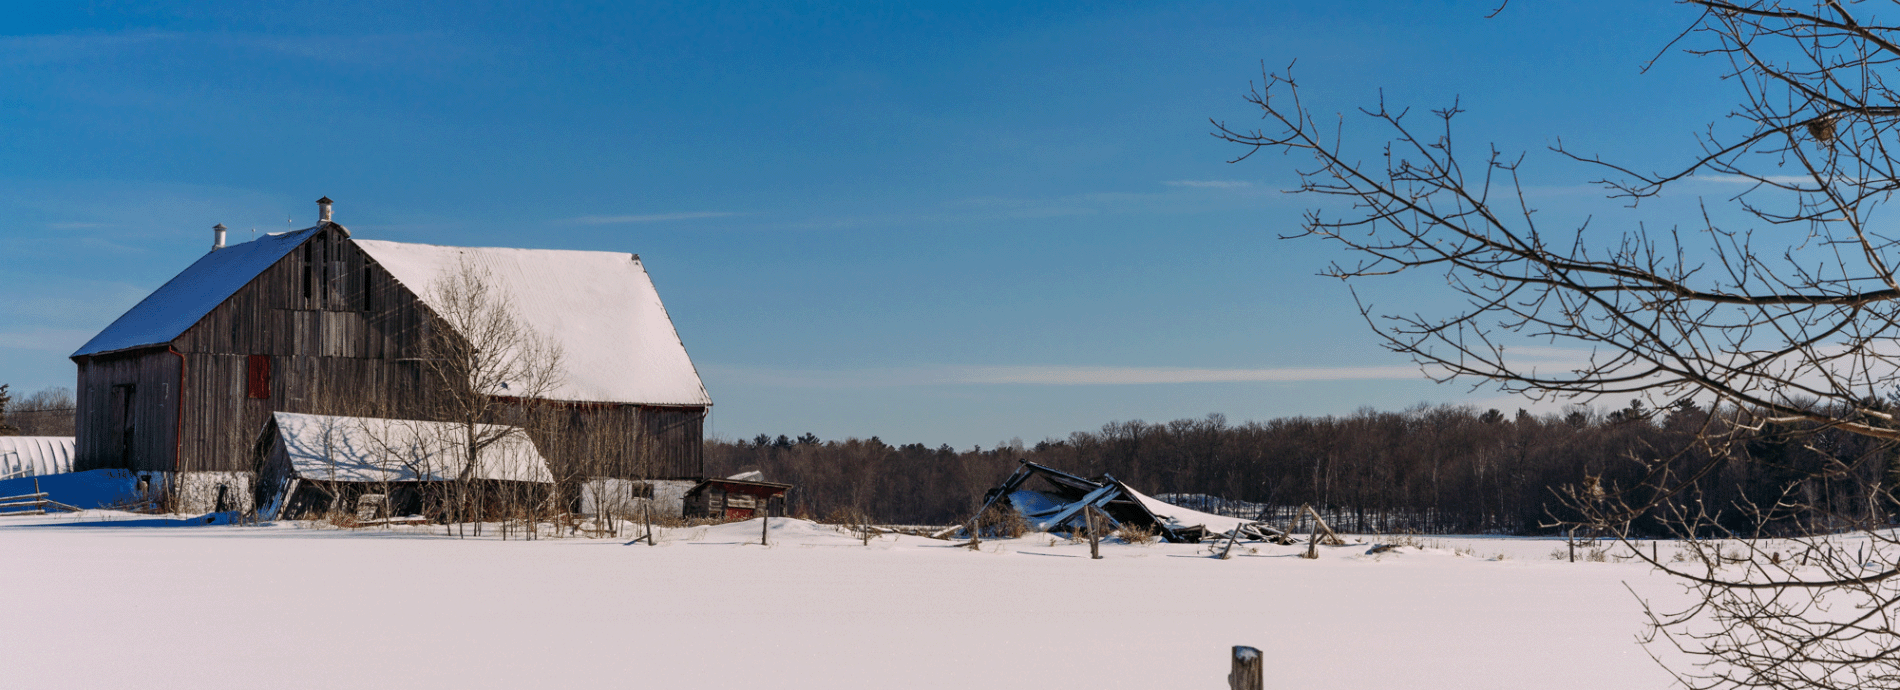 agricultural field and barn in fall